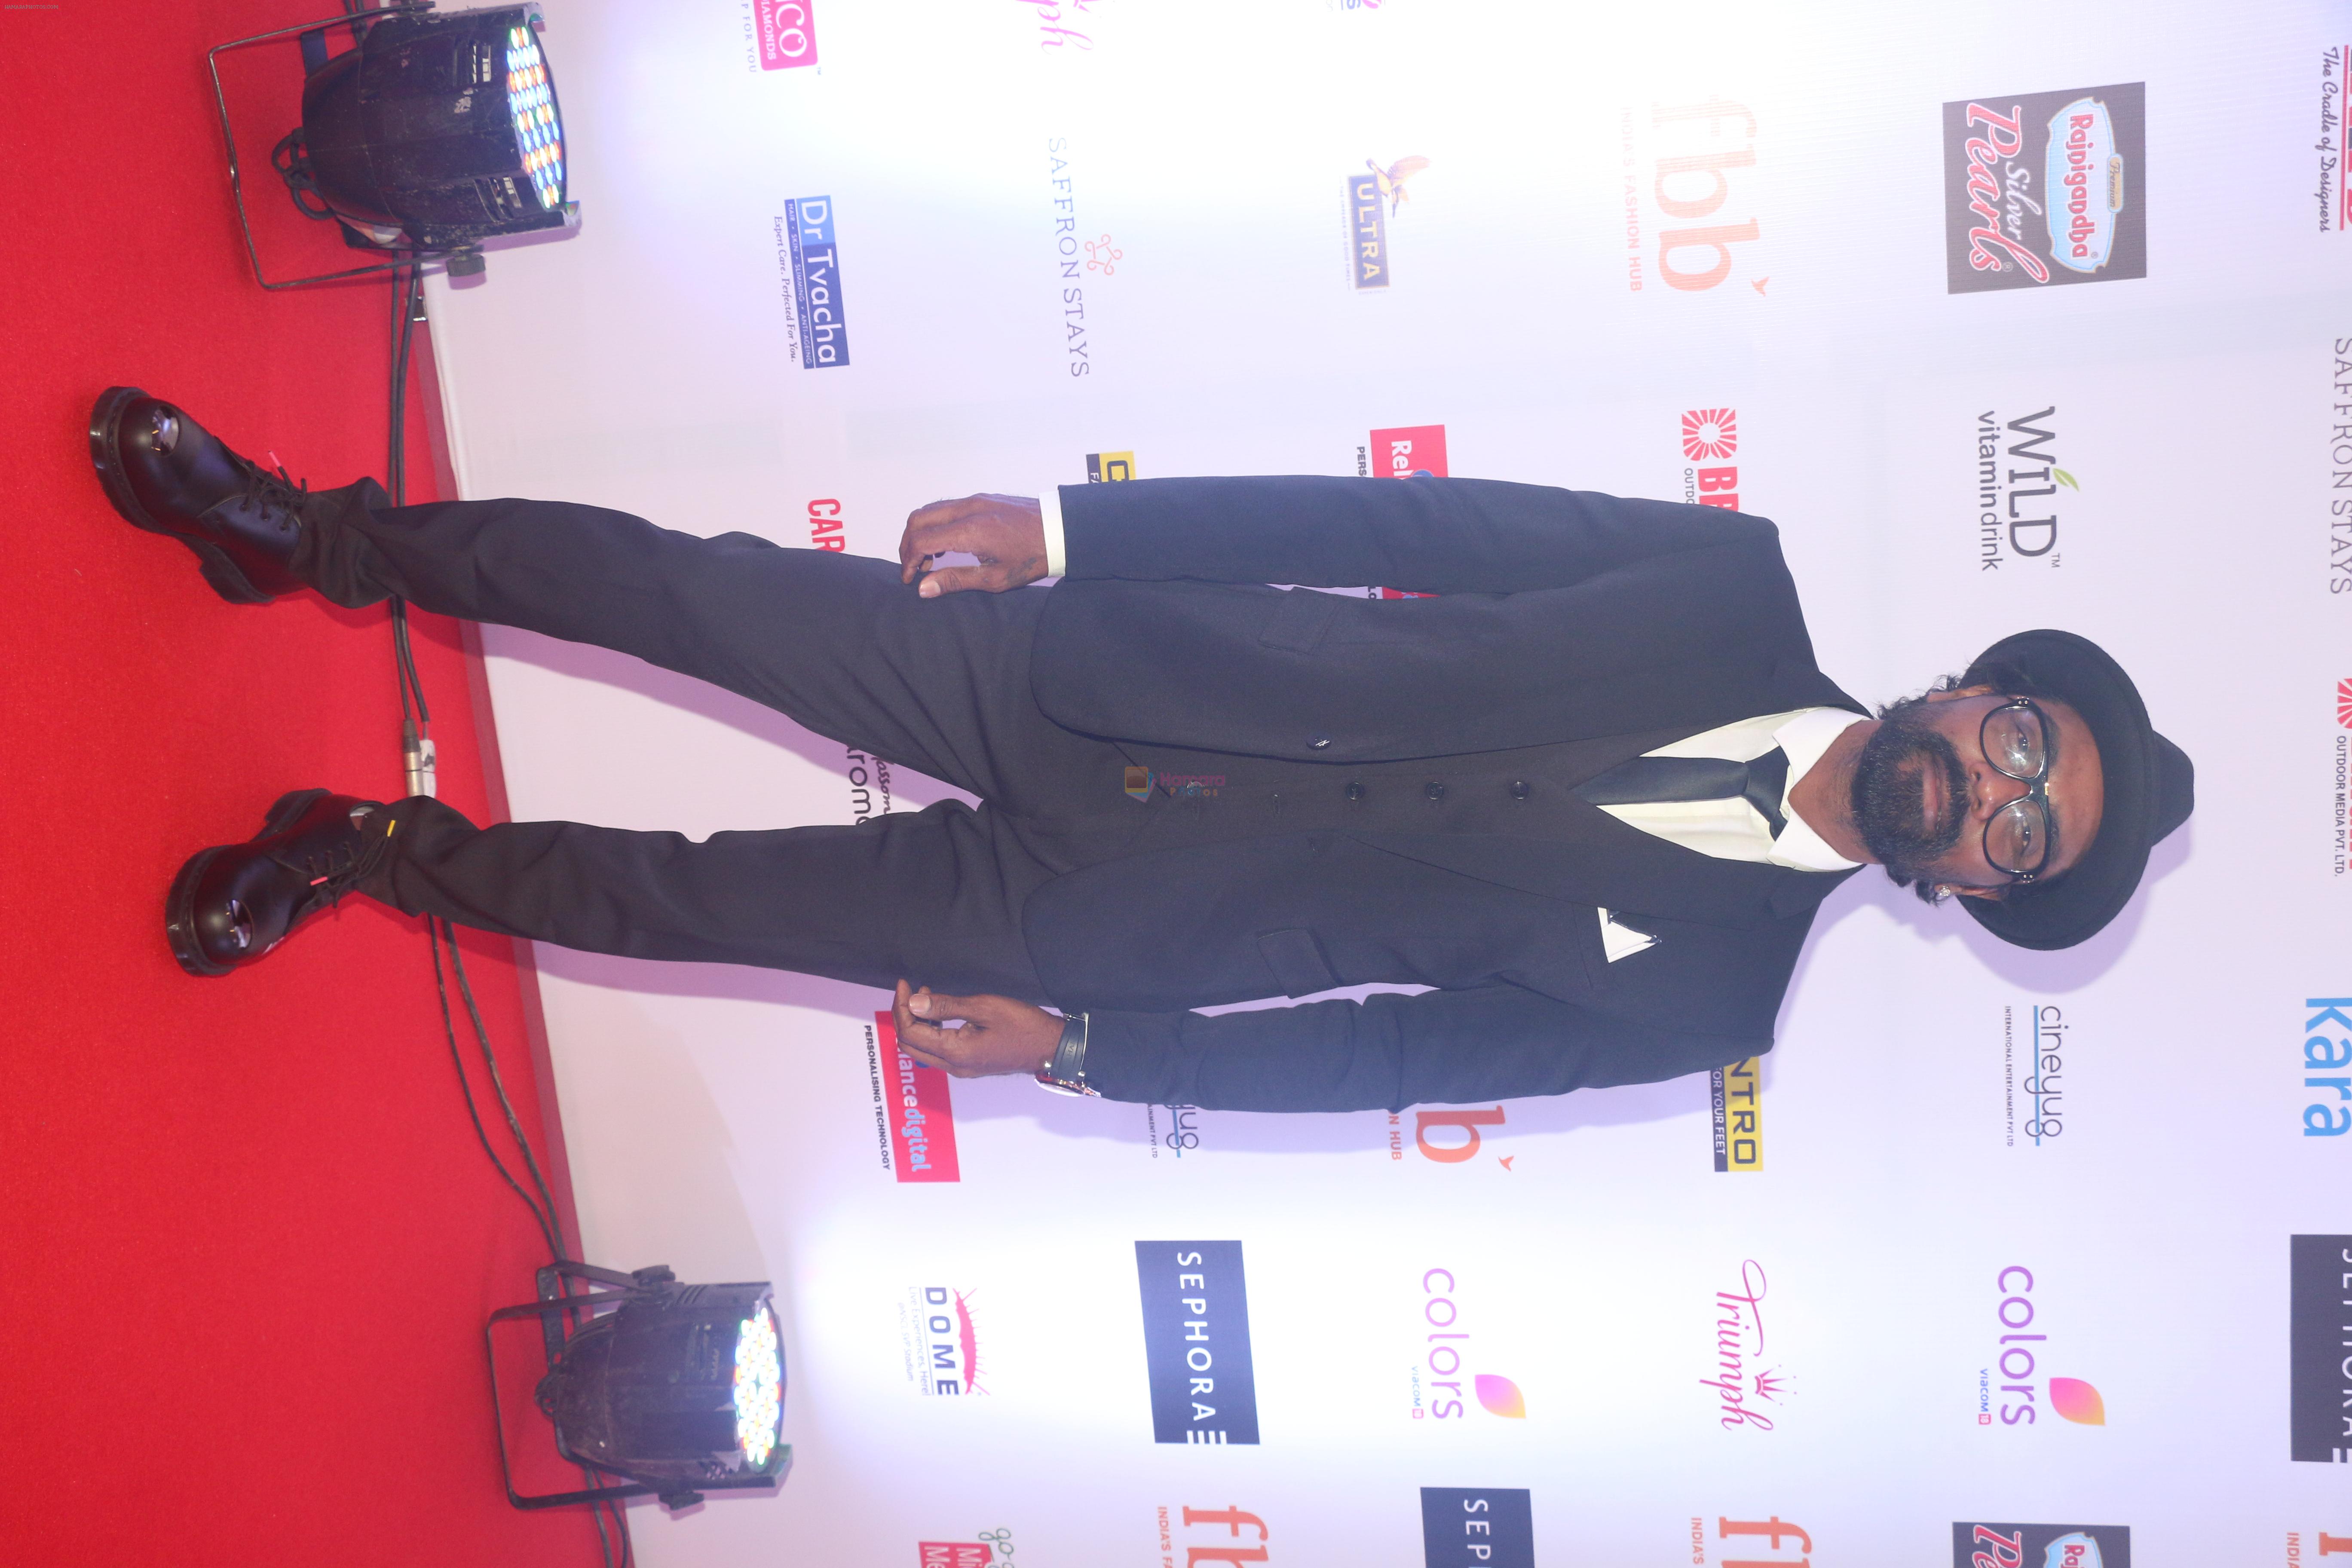 Remo D Souza at the Grand Finale of Femina Miss India in NSCI worli on 15th June 2019